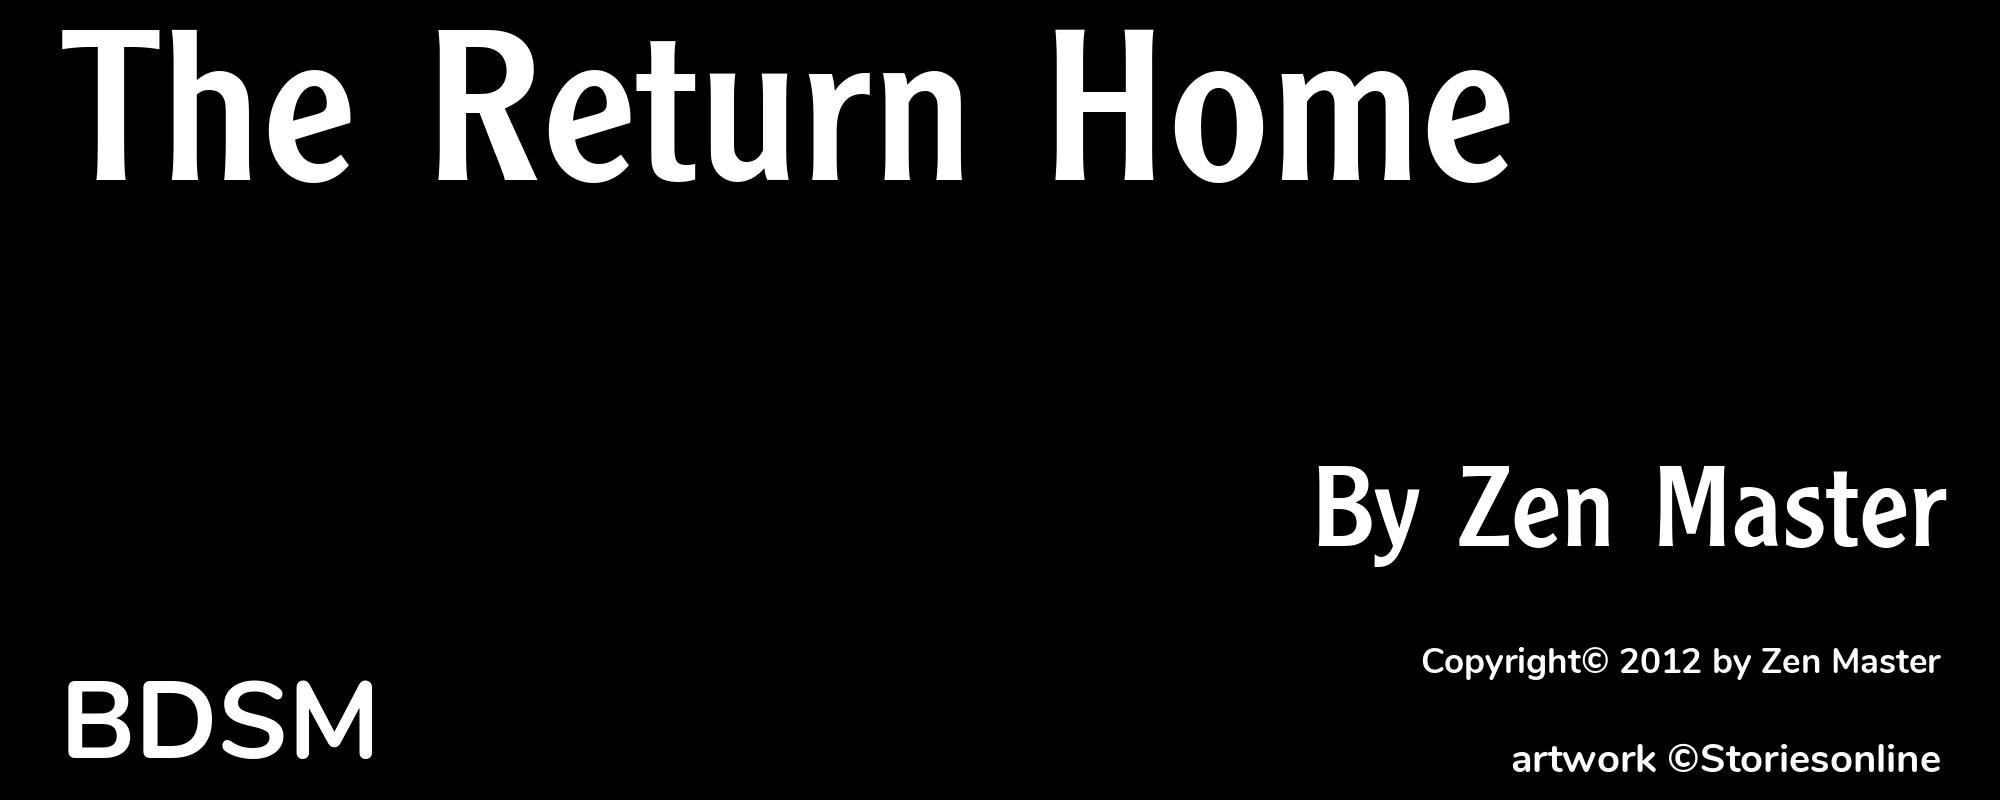 The Return Home - Cover